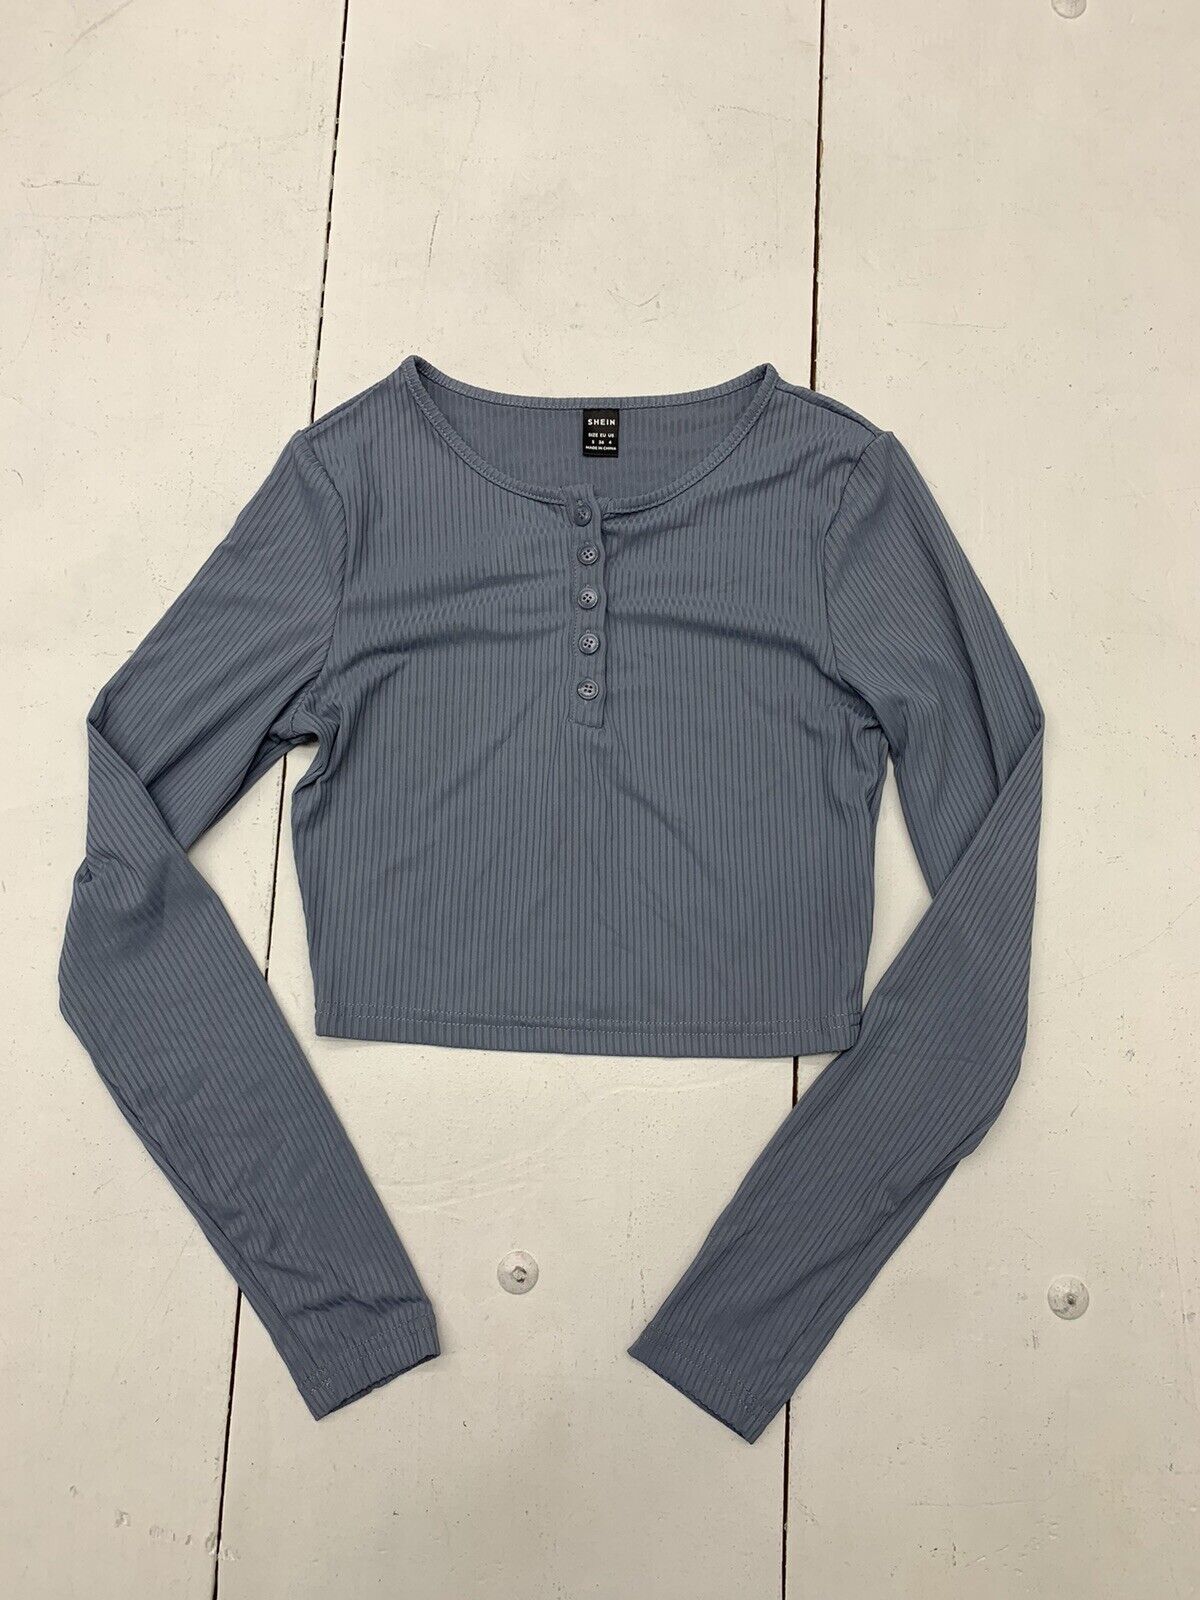 Shein Womens Grey/Blue Cropped Long Sleeve Shirt Size Small